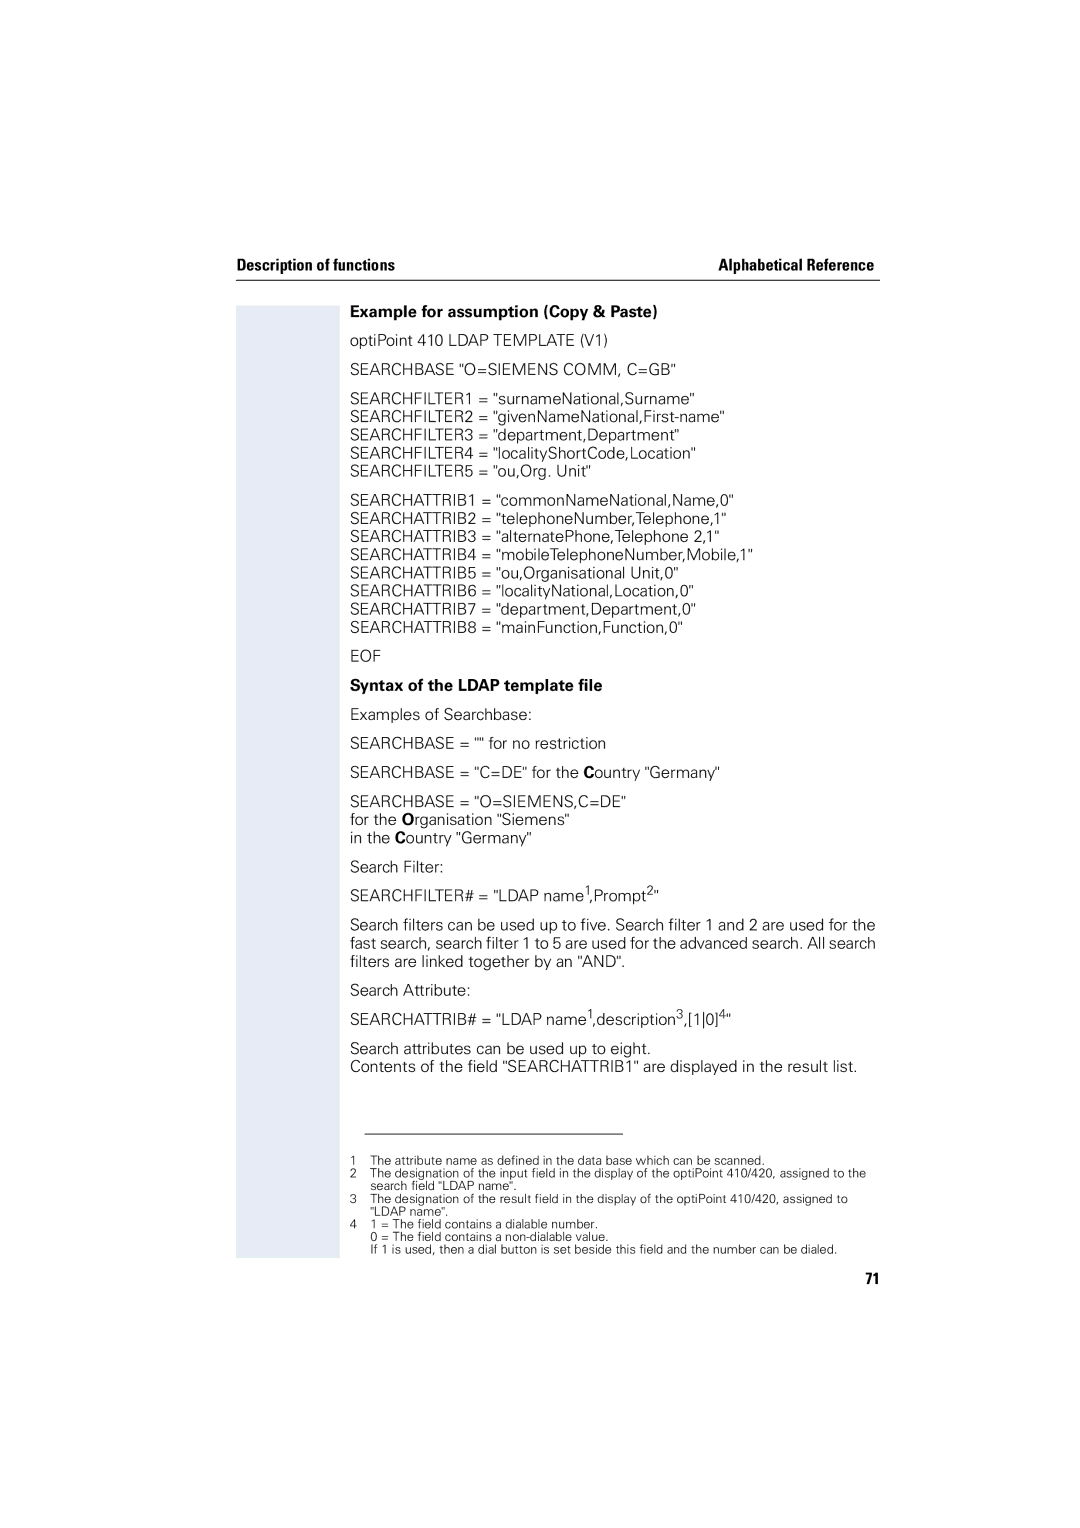 Siemens 2000 manual Example for assumption Copy & Paste, Syntax of the Ldap template file 